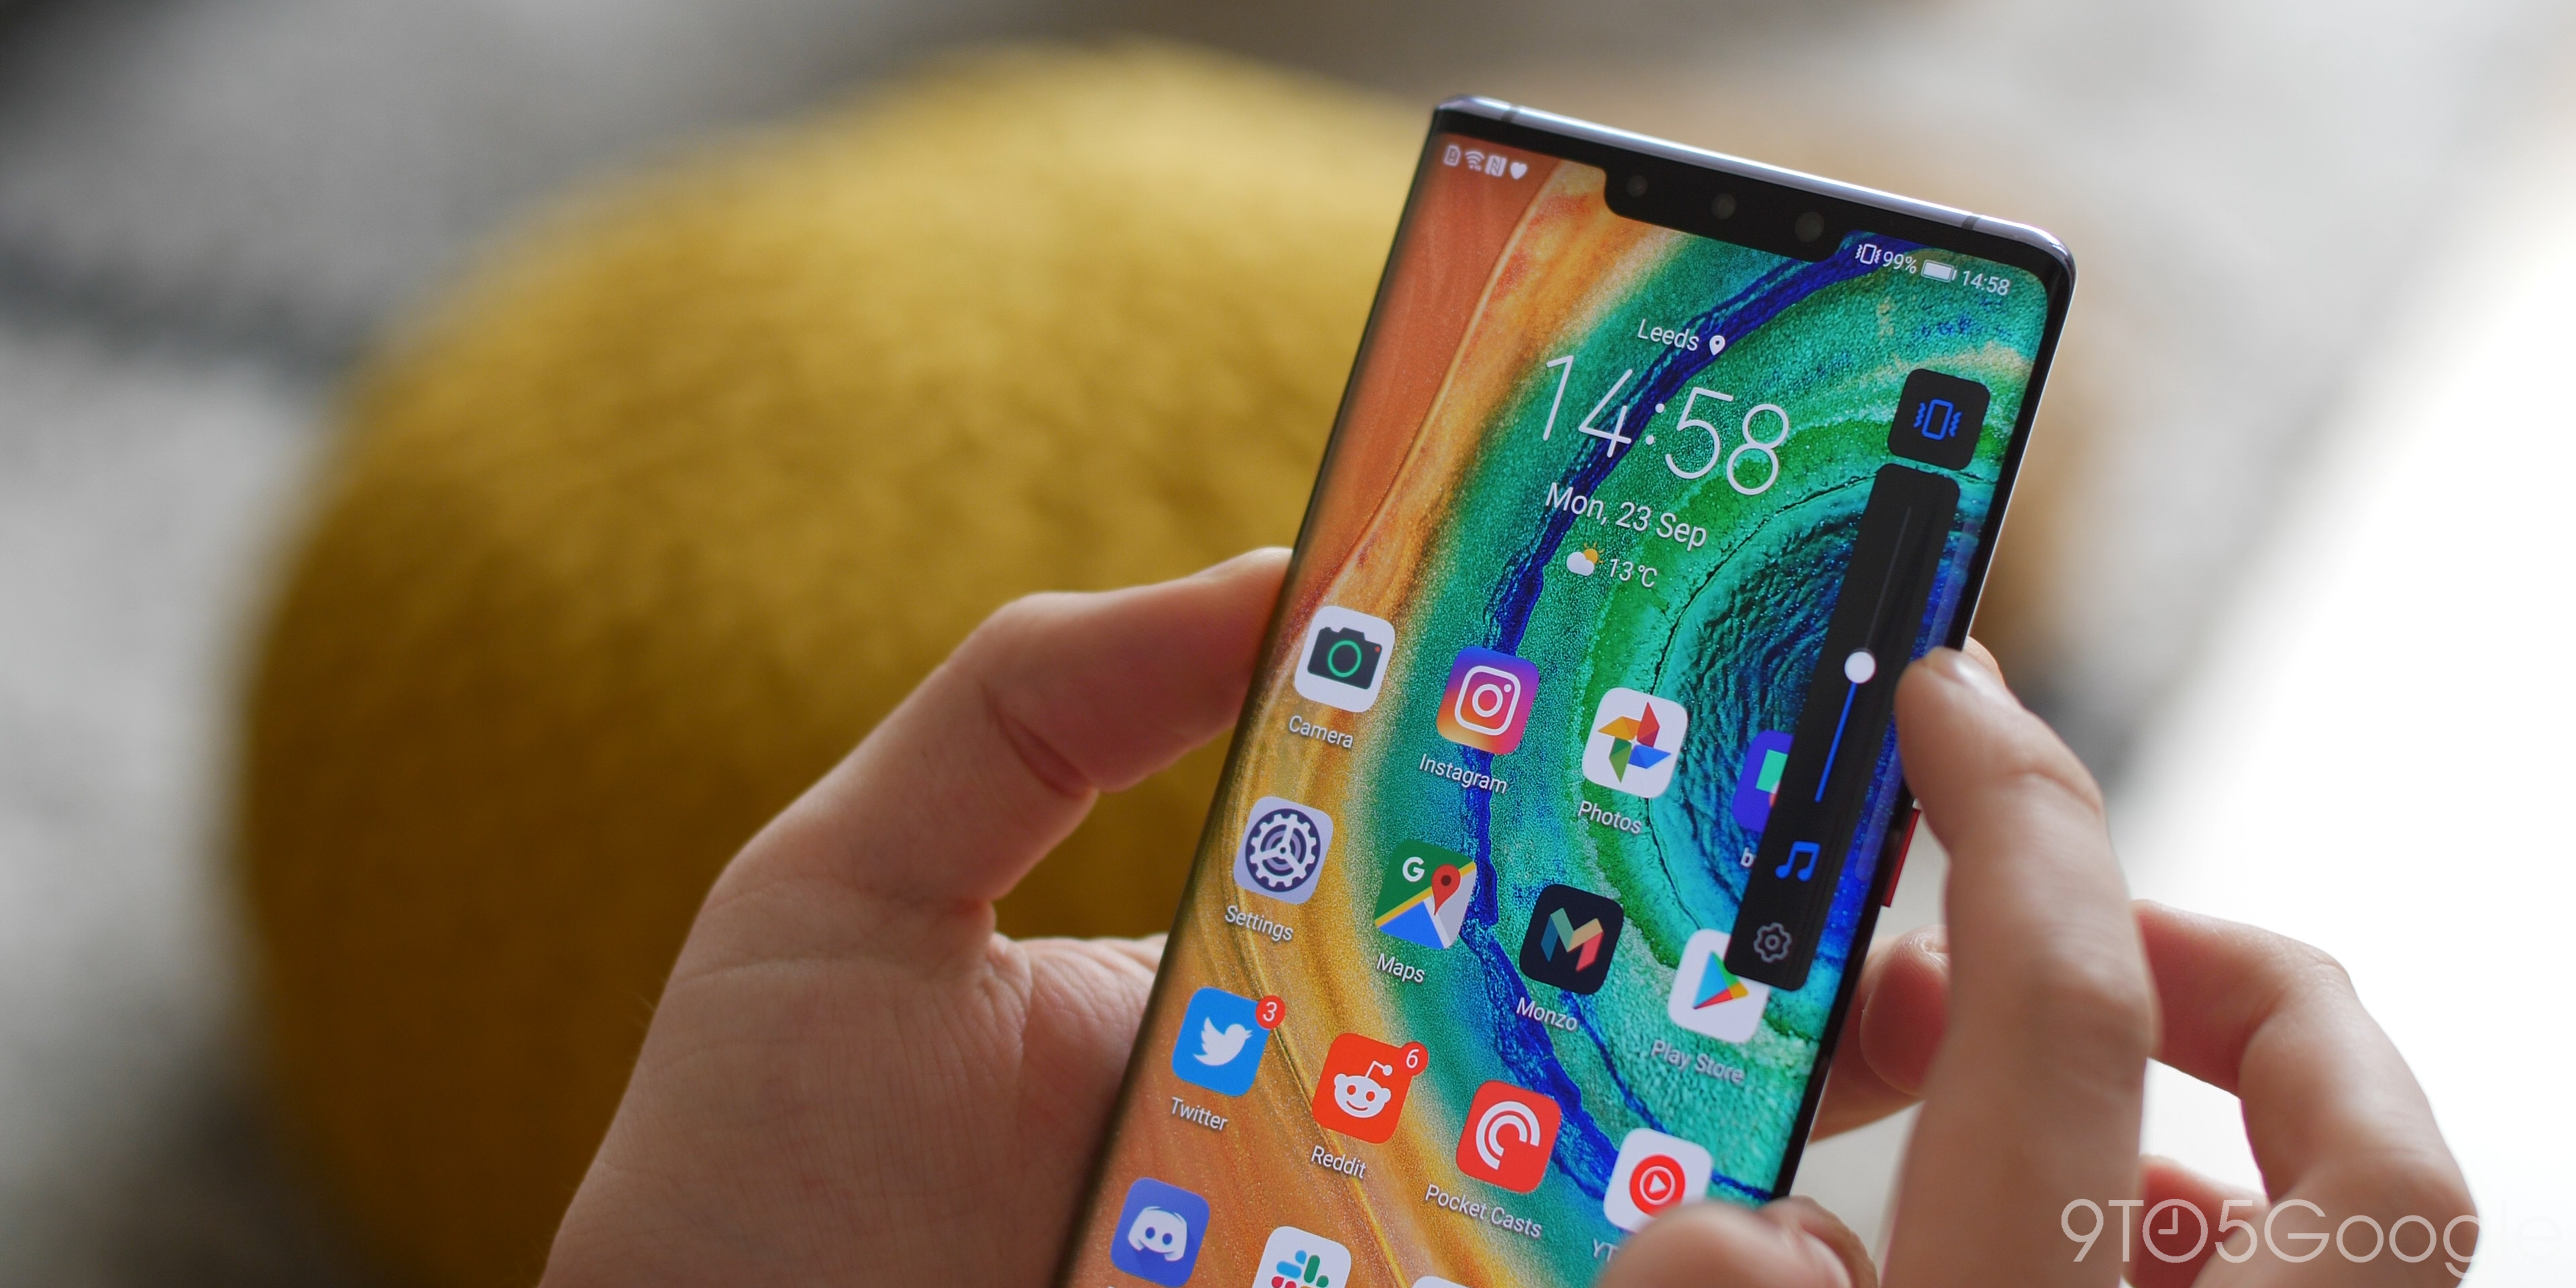 Huawei Mate 30 Pro hands-on - Software and performance